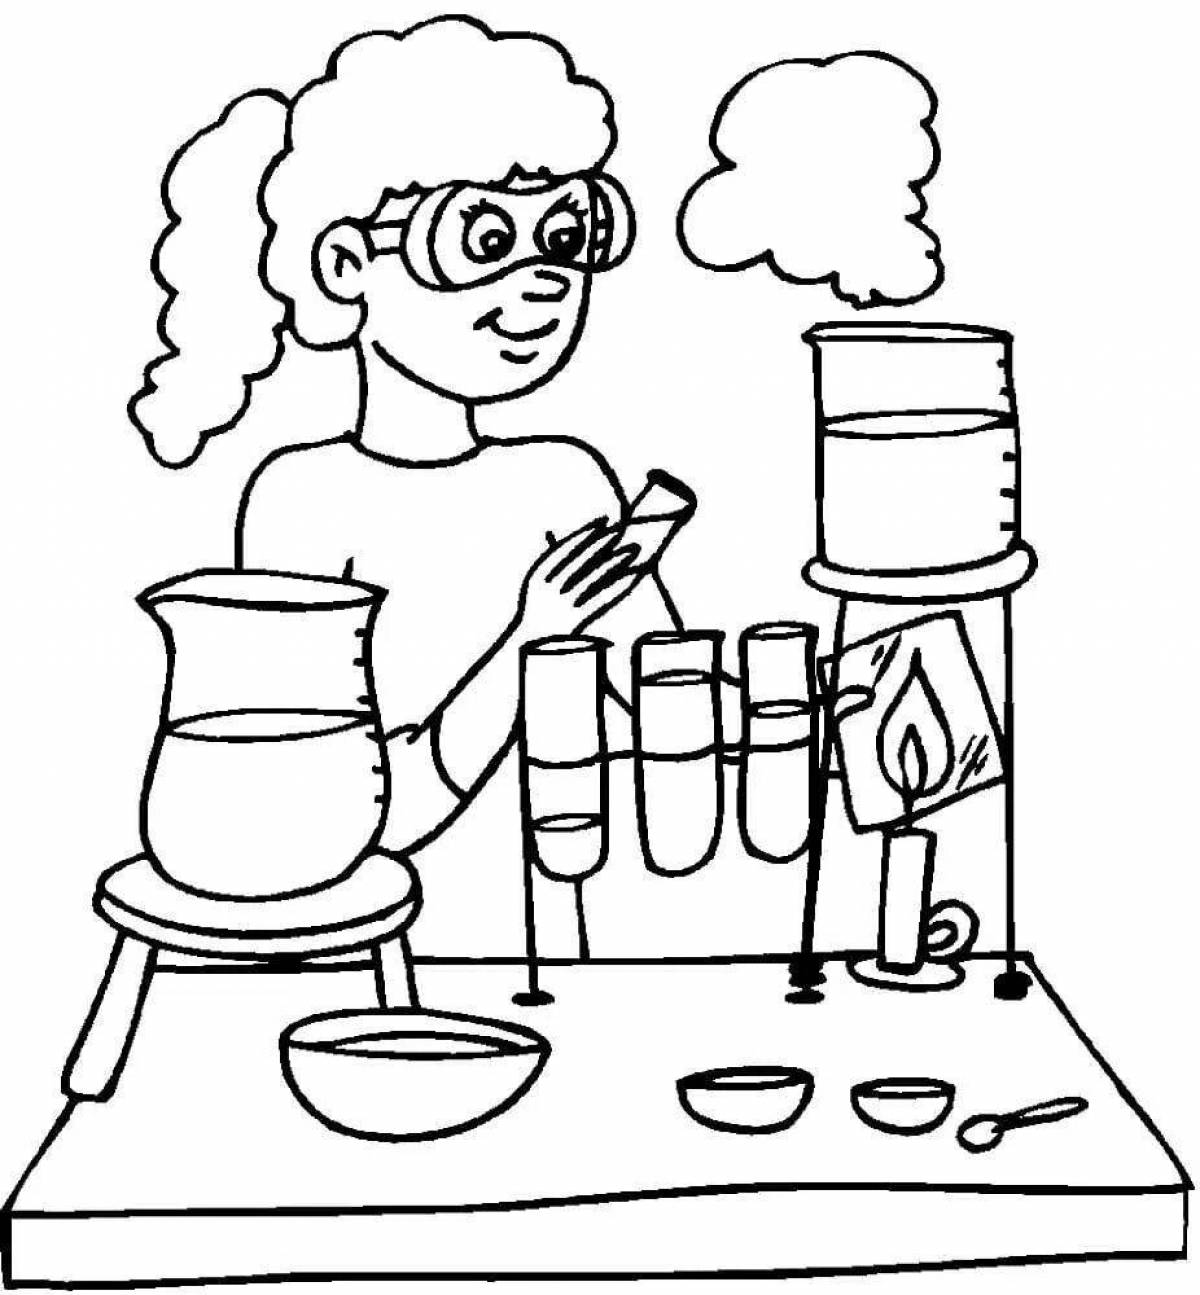 Creative coloring scientists for kids